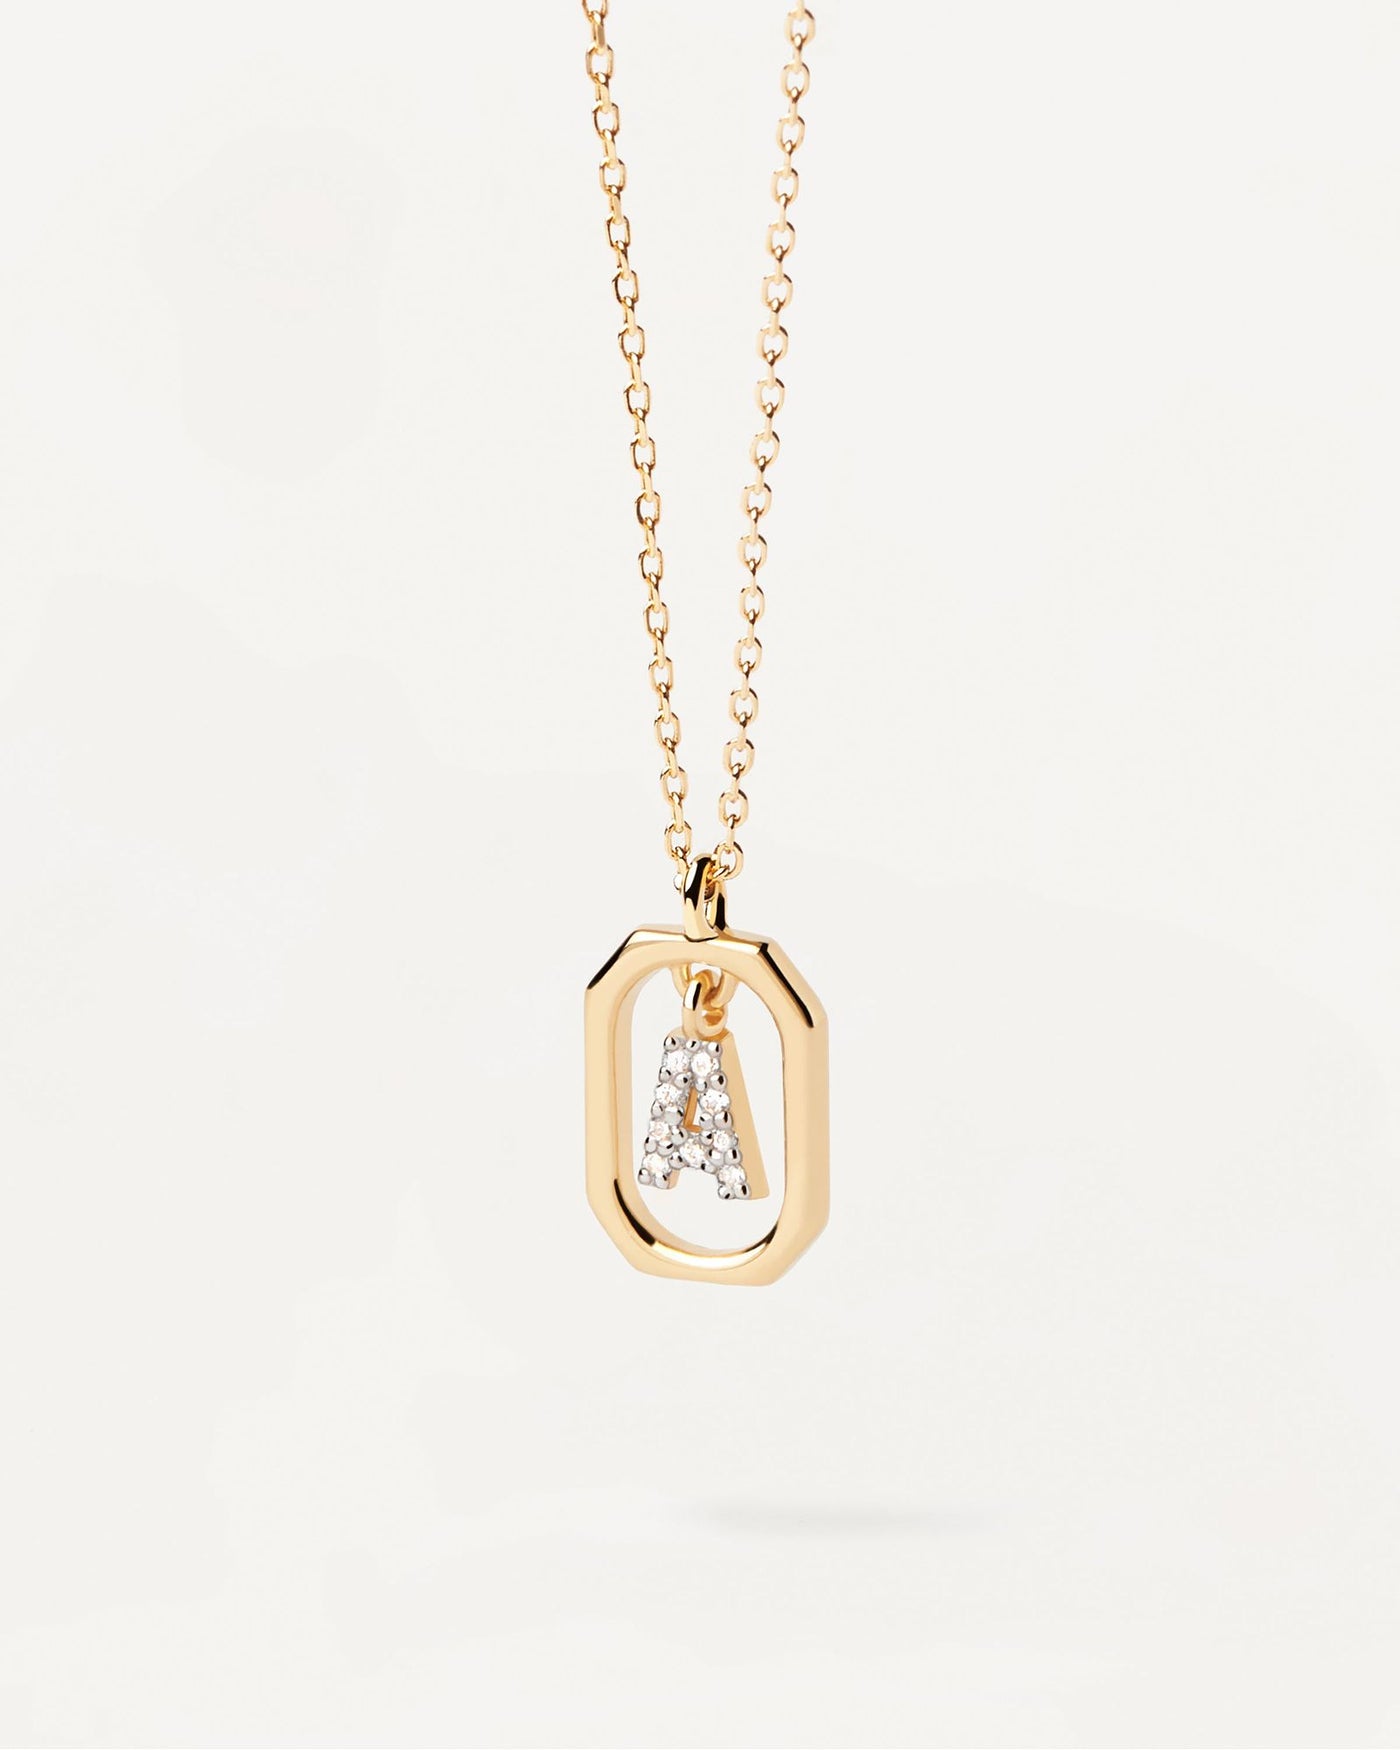 2024 Selection | Mini Letter A Necklace. Small initial A necklace in zirconia inside gold-plated silver octagonal pendant. Get the latest arrival from PDPAOLA. Place your order safely and get this Best Seller. Free Shipping.